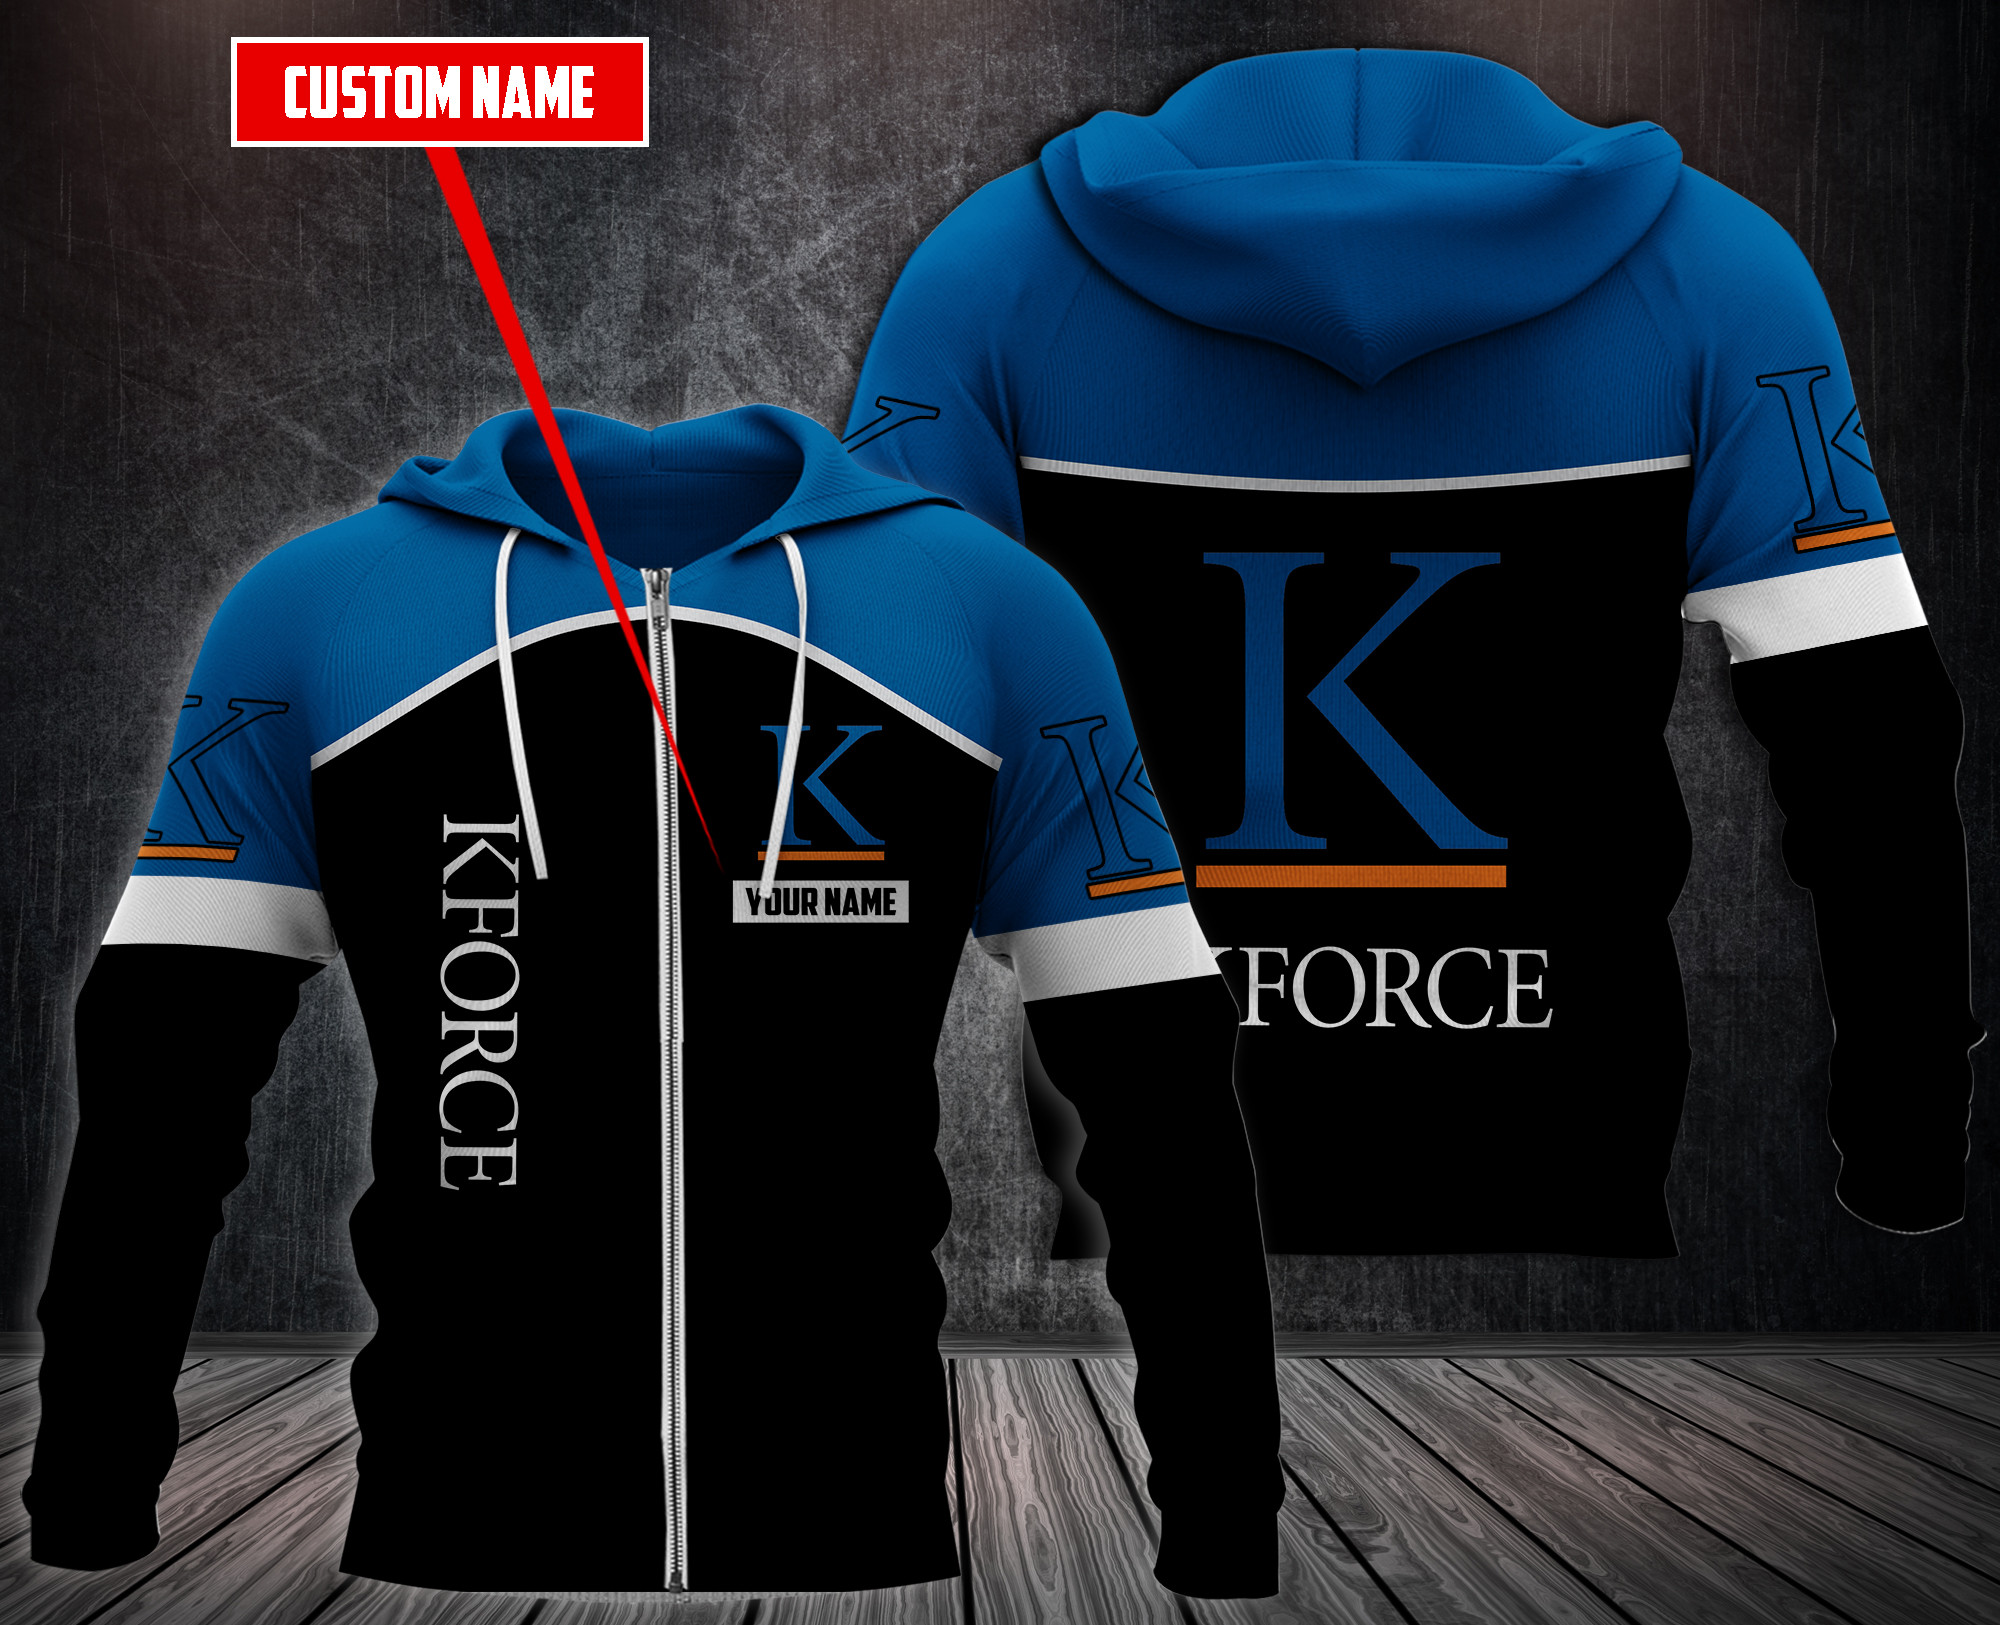 Choose the right hoodies for you on our boxboxshirt and ethershirt websites in 2022 50